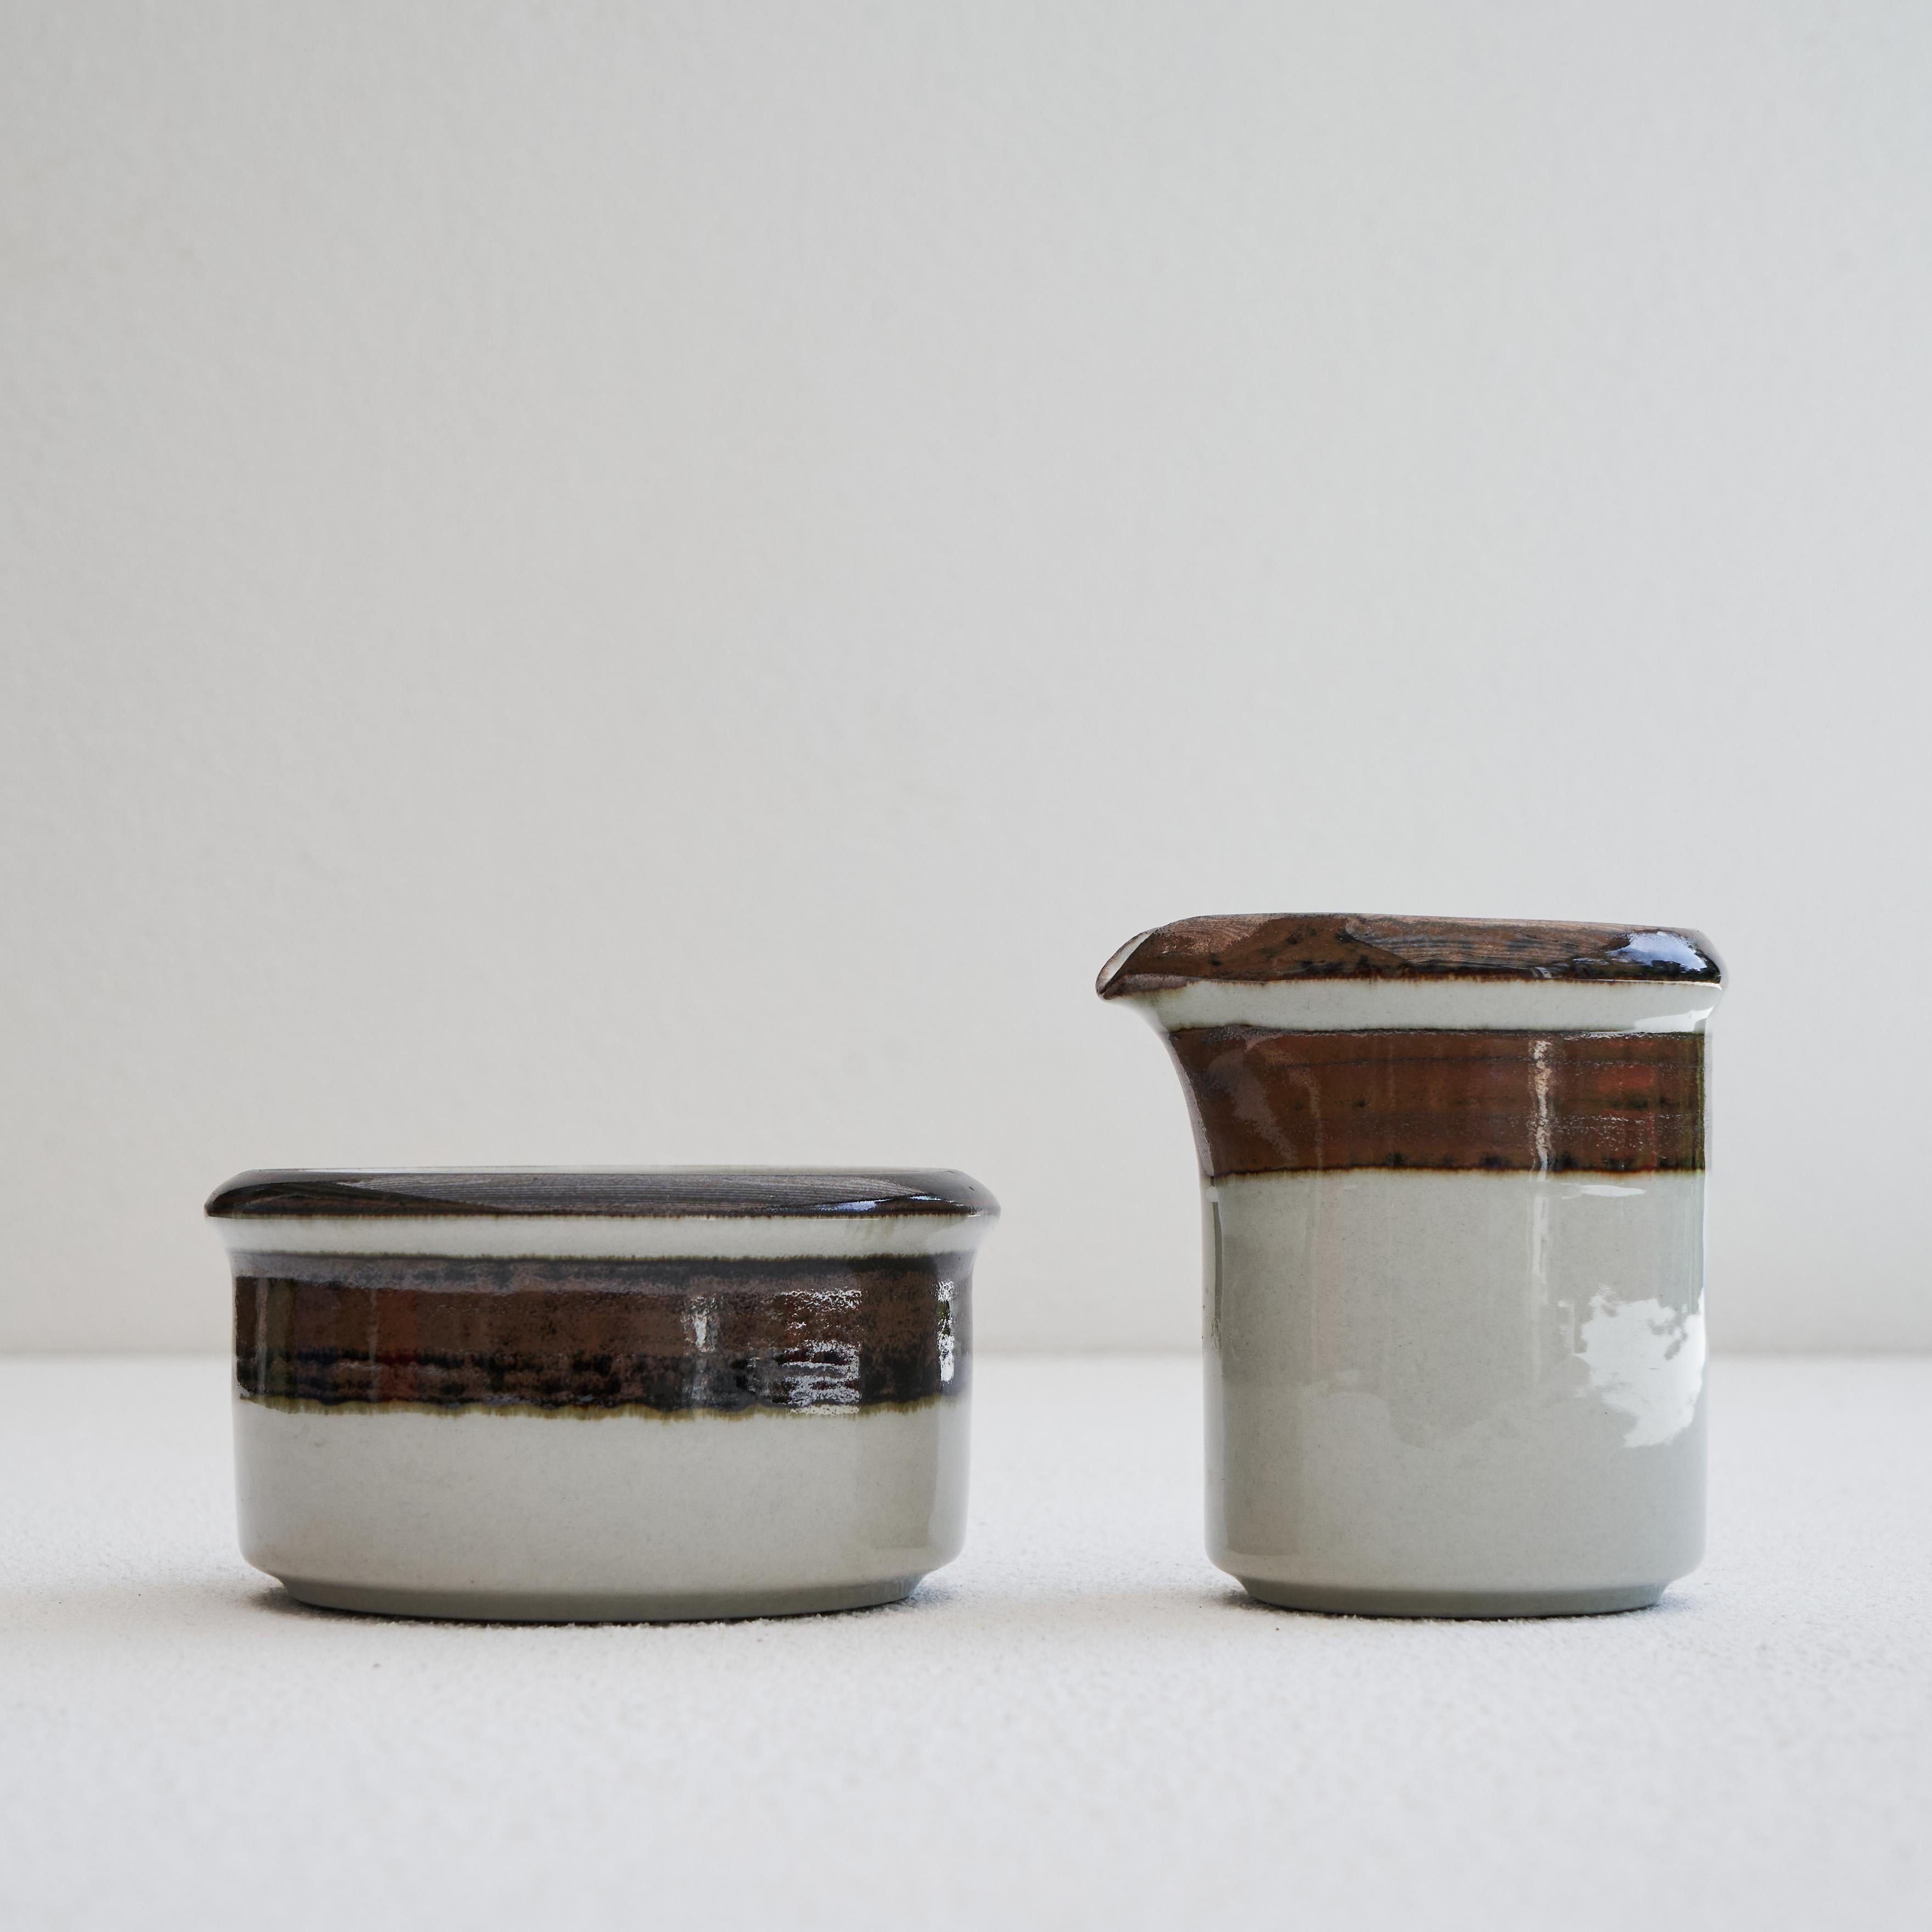 Anja Jaatinen-Winqvist 'Karelia' Milk & Sugar Set for Arabia, Finland, 1970s.

This is a wonderful milk and sugar set designed by Anja Jaatinen-Winqvist and made by Arabia Finland in the 1970s or 1980s. Great simple design and elegant glazing.